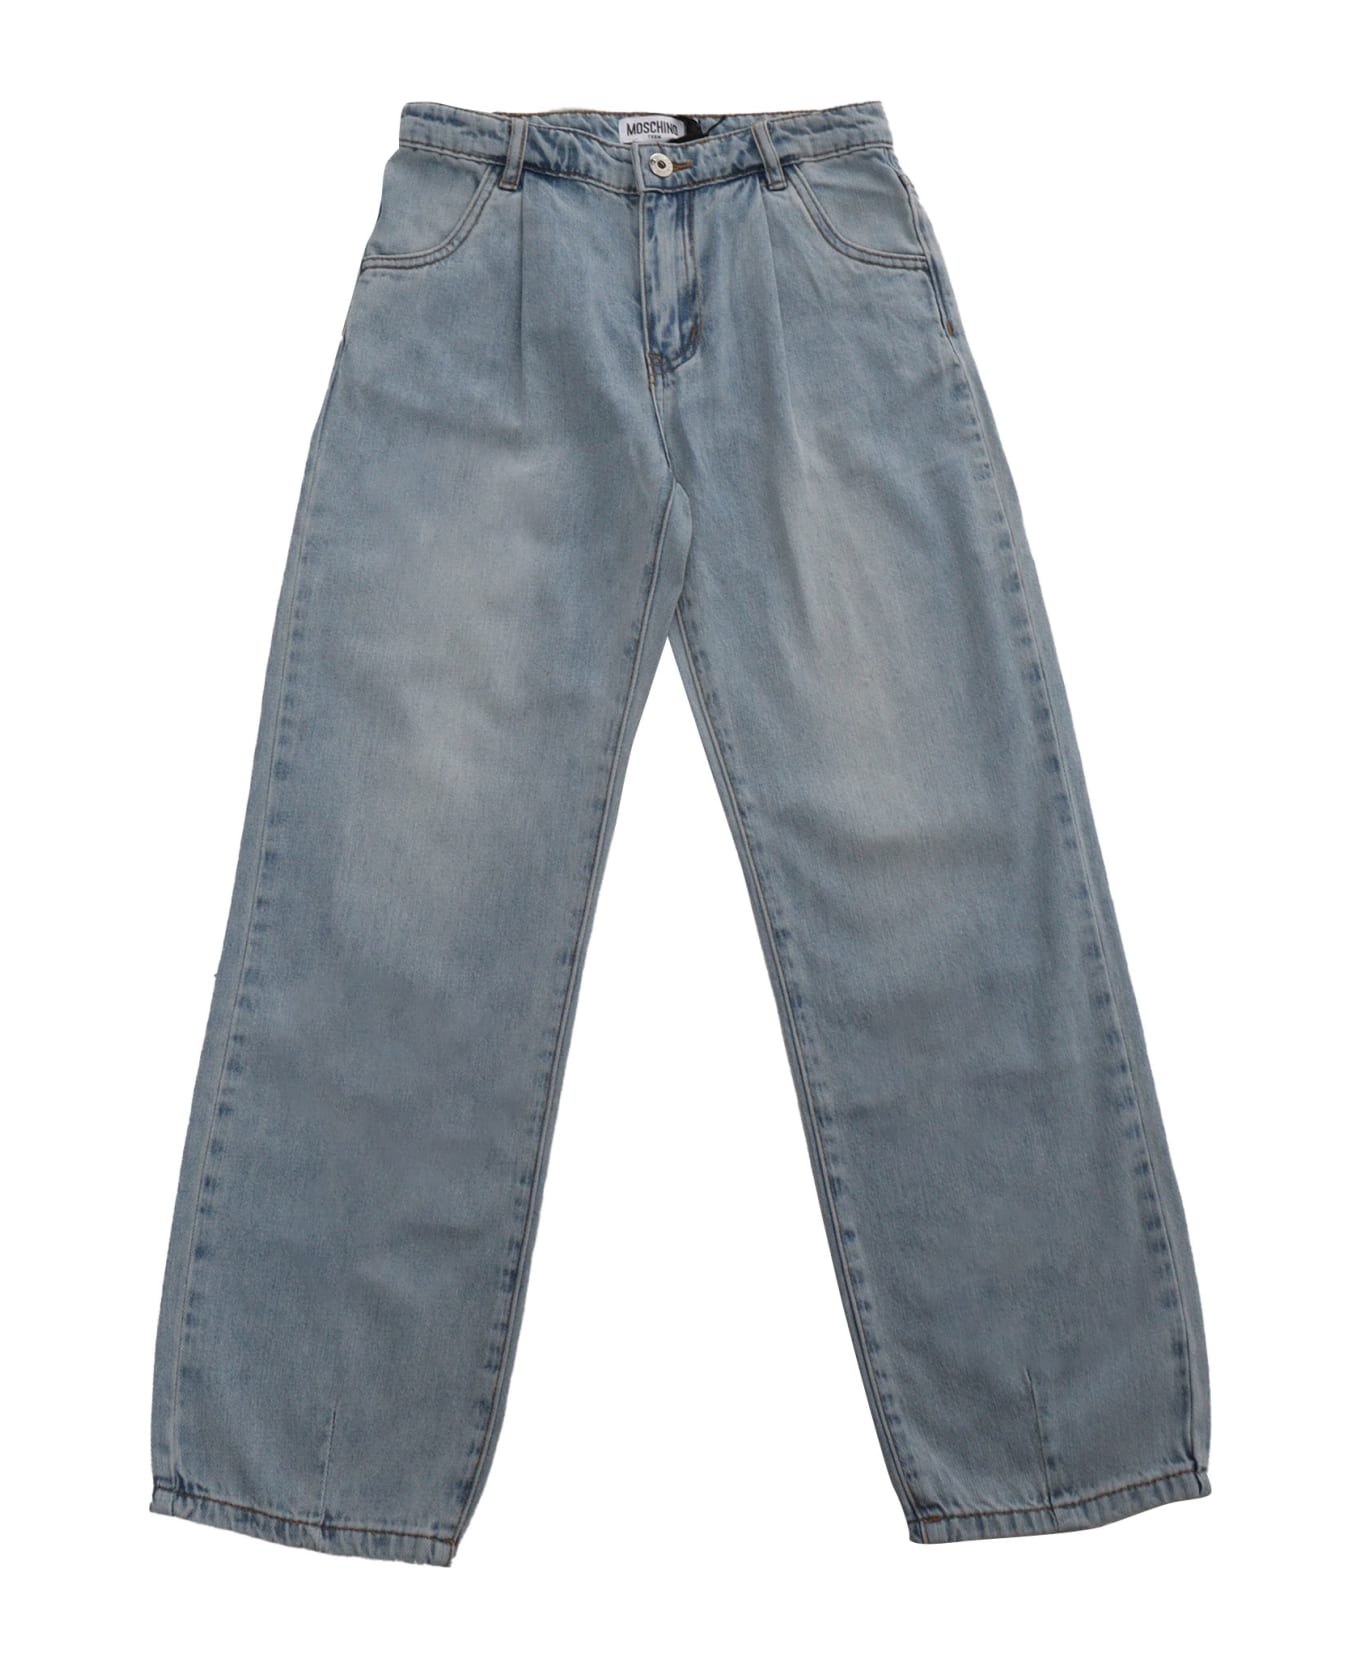 Moschino Baggy Jeans - LIGHT BLUE